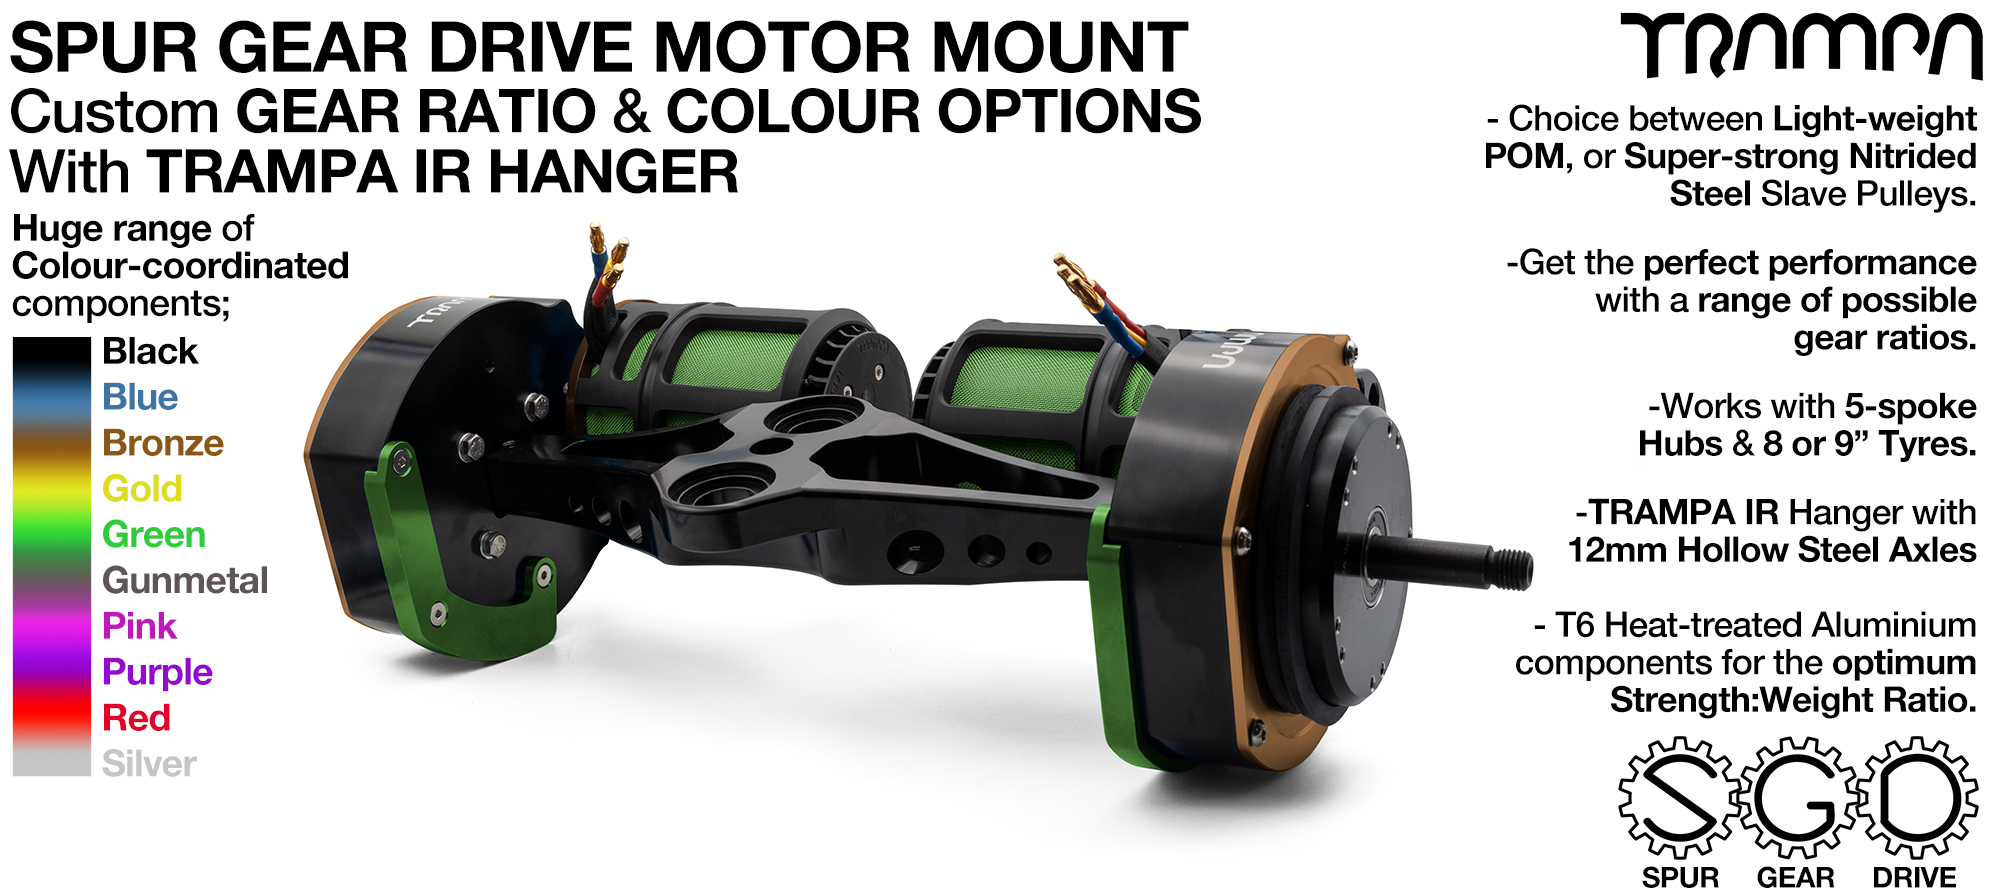 Mountainboard Spur Gear Drive TWIN with PULLEYS & FILTERS Mounted on a Hanger 